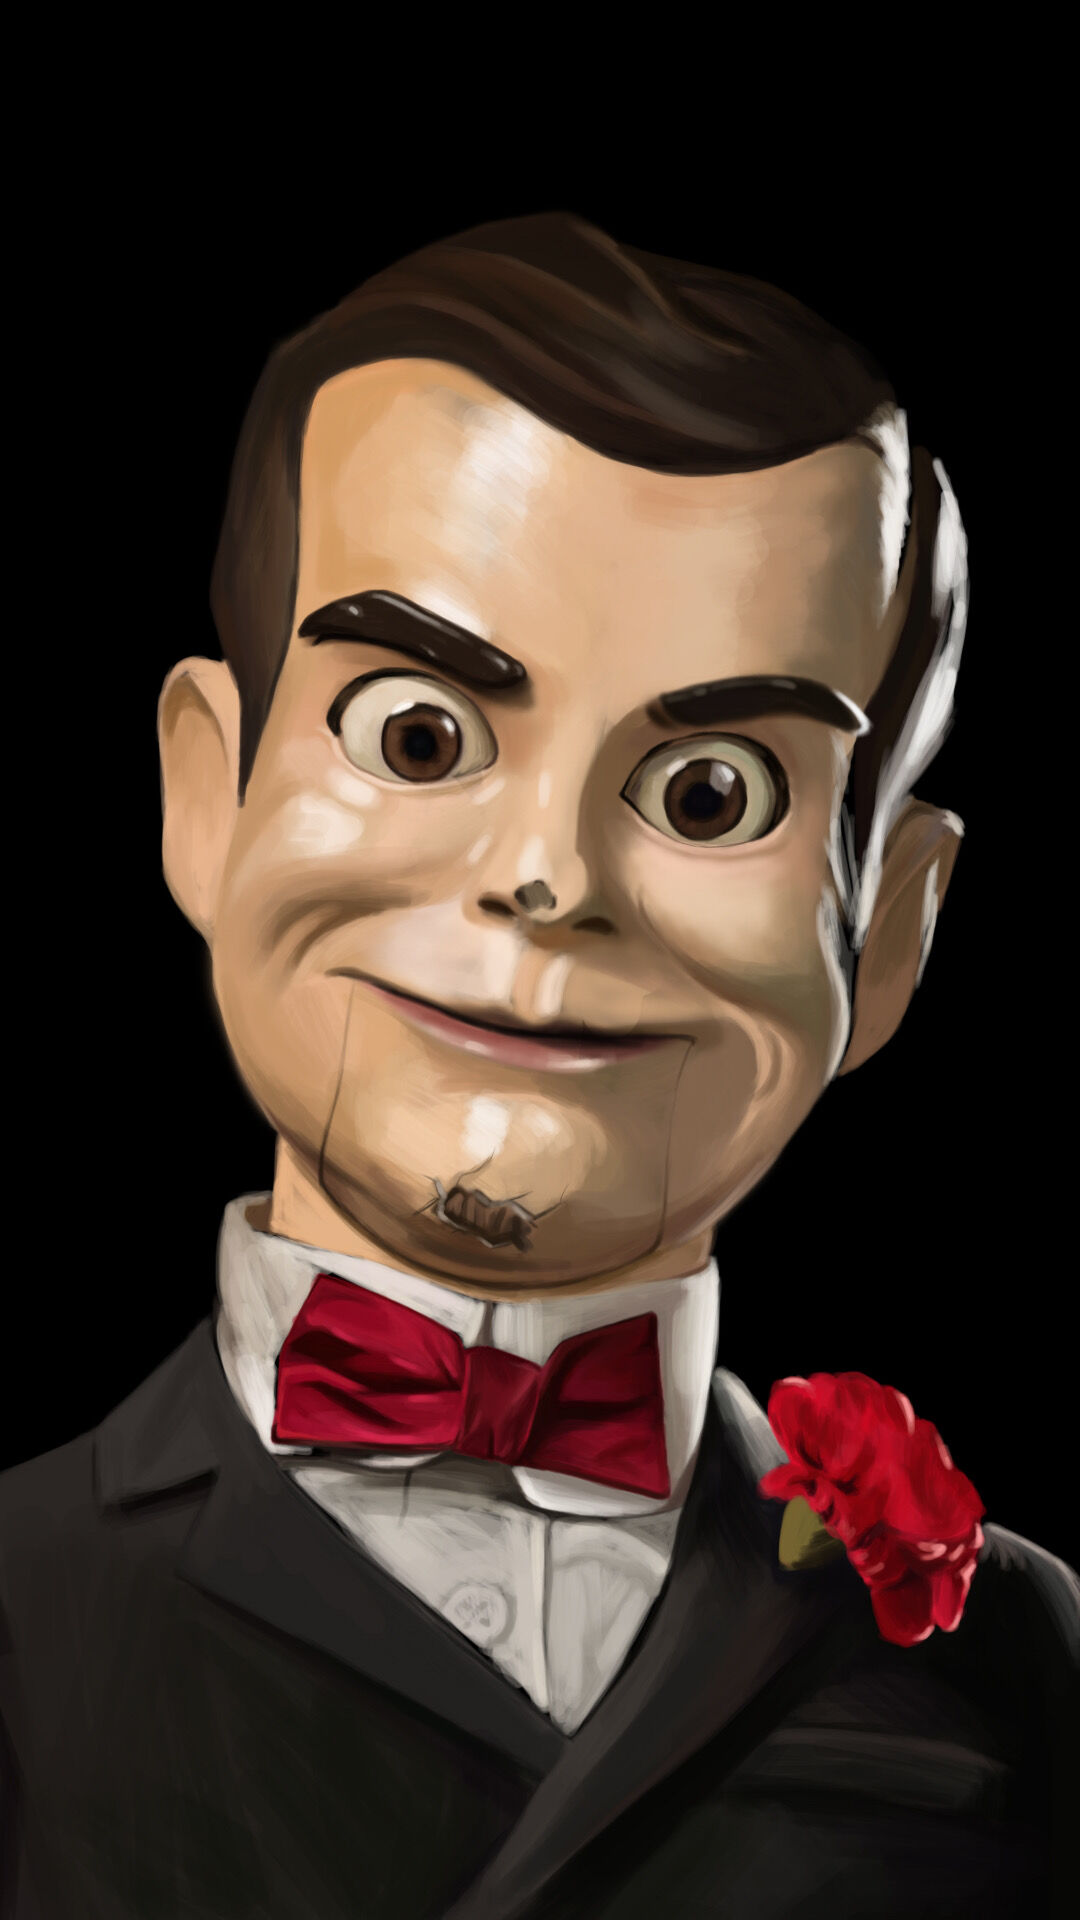 A Happy Accident Image Free Download - Slappy The Dummy Fanart PNG Image |  Transparent PNG Free Download on SeekPNG